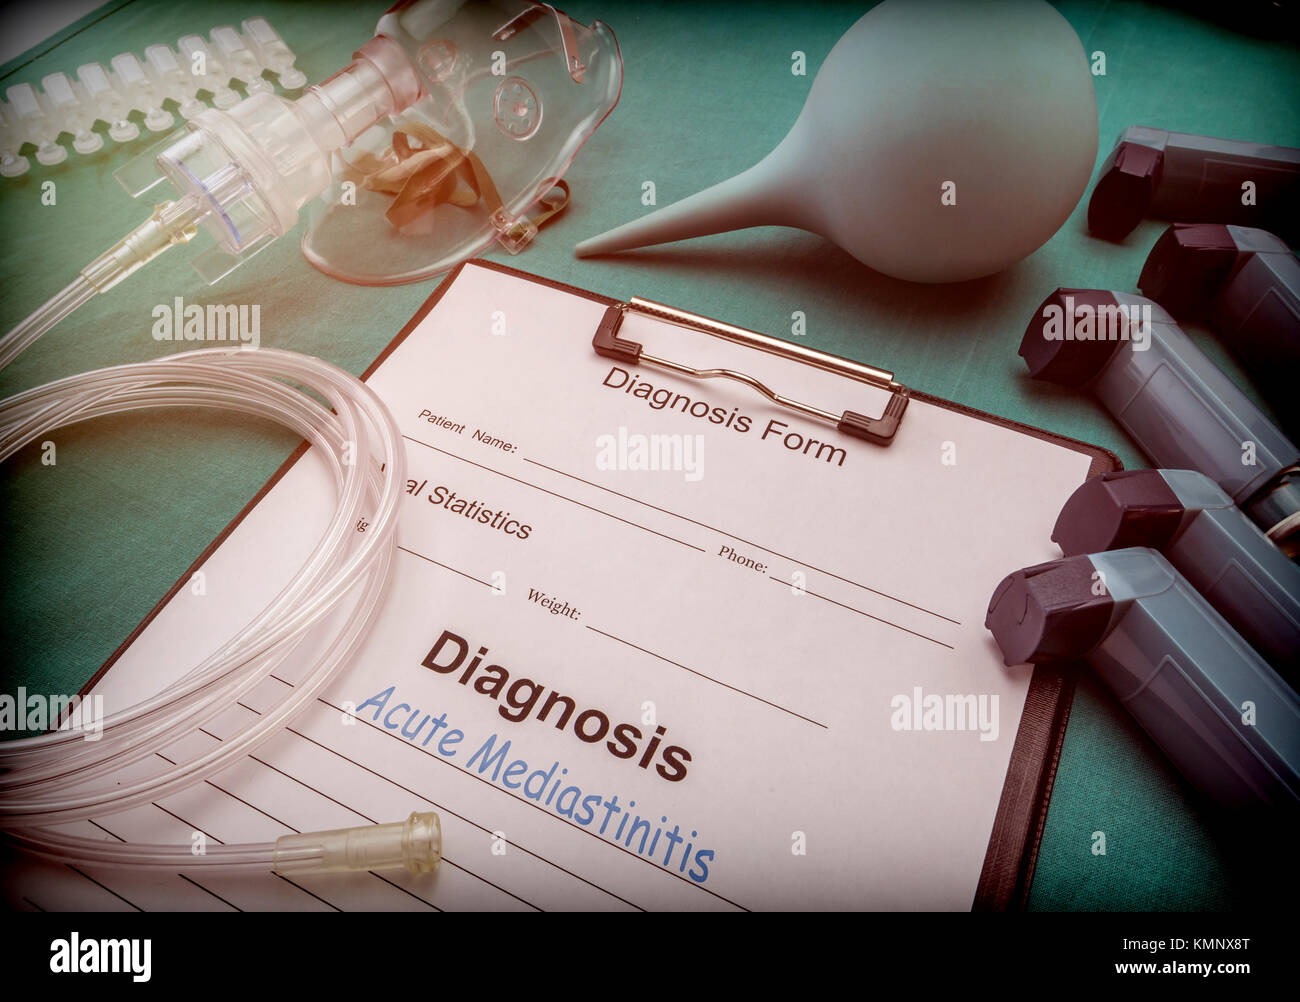 Diagnostic form, acute mediastinitis, Oxygen mask and inhalers in a hospital, conceptual image Stock Photo